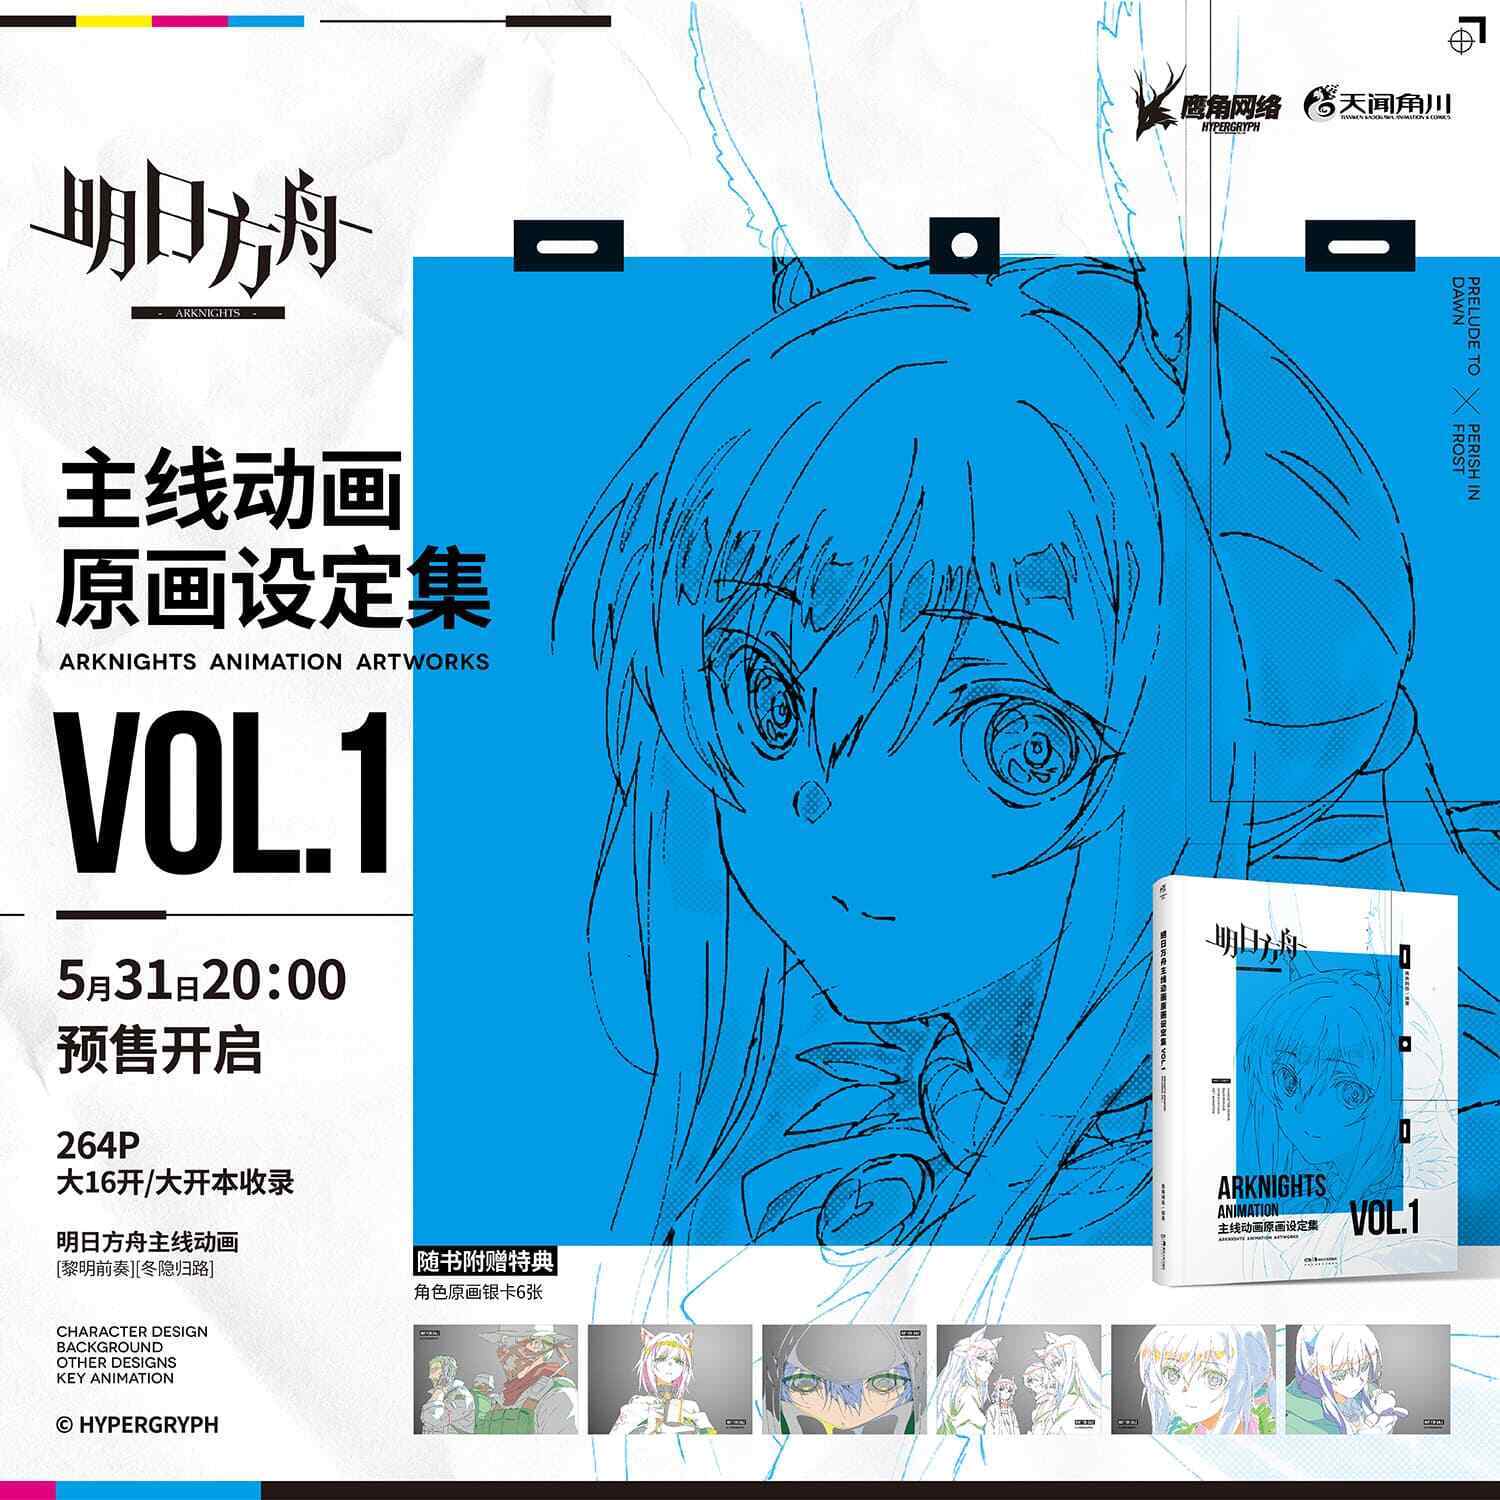 Arknights Animation Artworks VOL.1 Official Picture Art Book Album Collection 